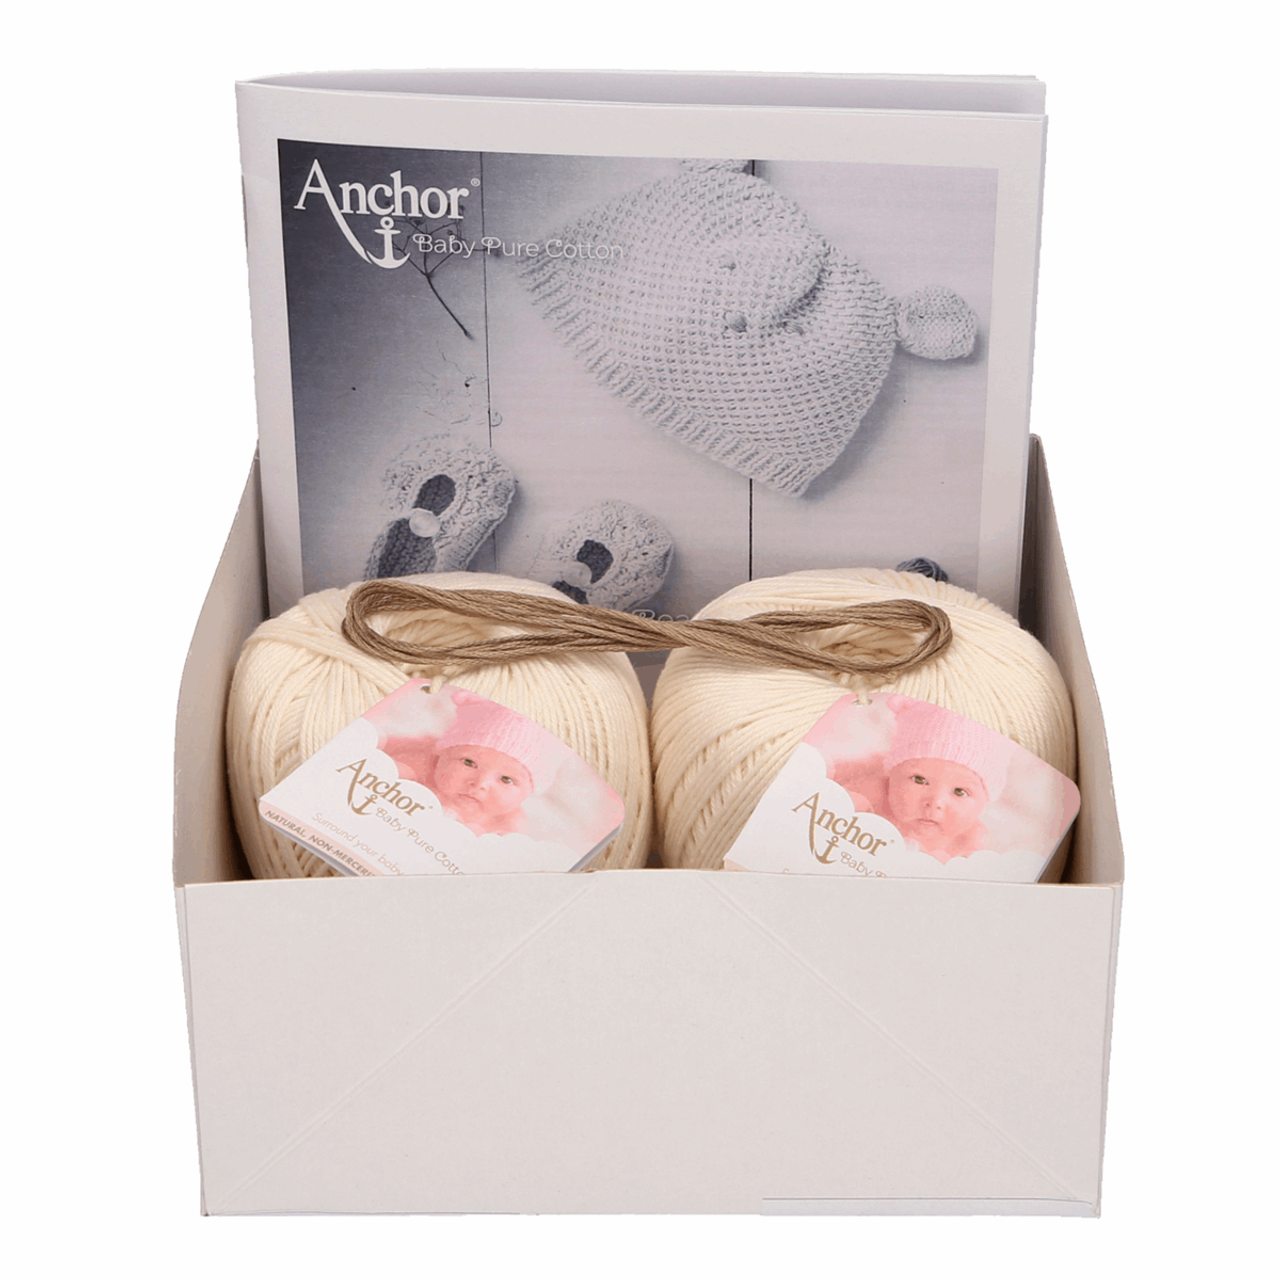 Beige Bear Beanie & Booties Baby Pure Cotton Knitting Kit